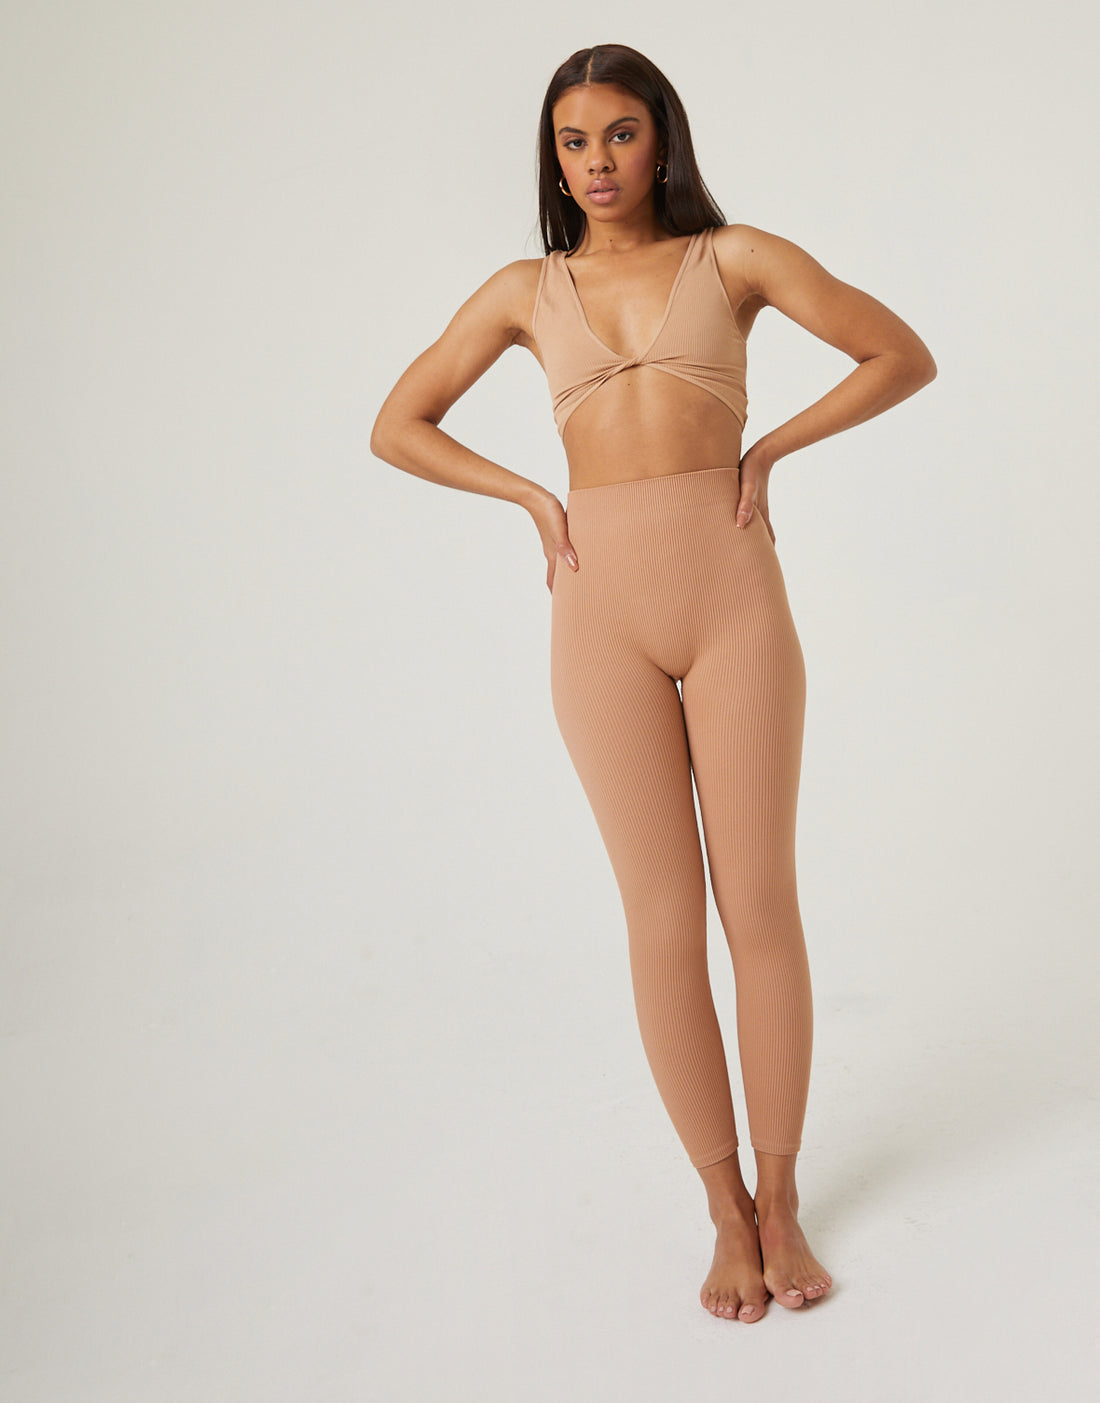 Simple Ribbed Leggings Bottoms Tan Small -2020AVE